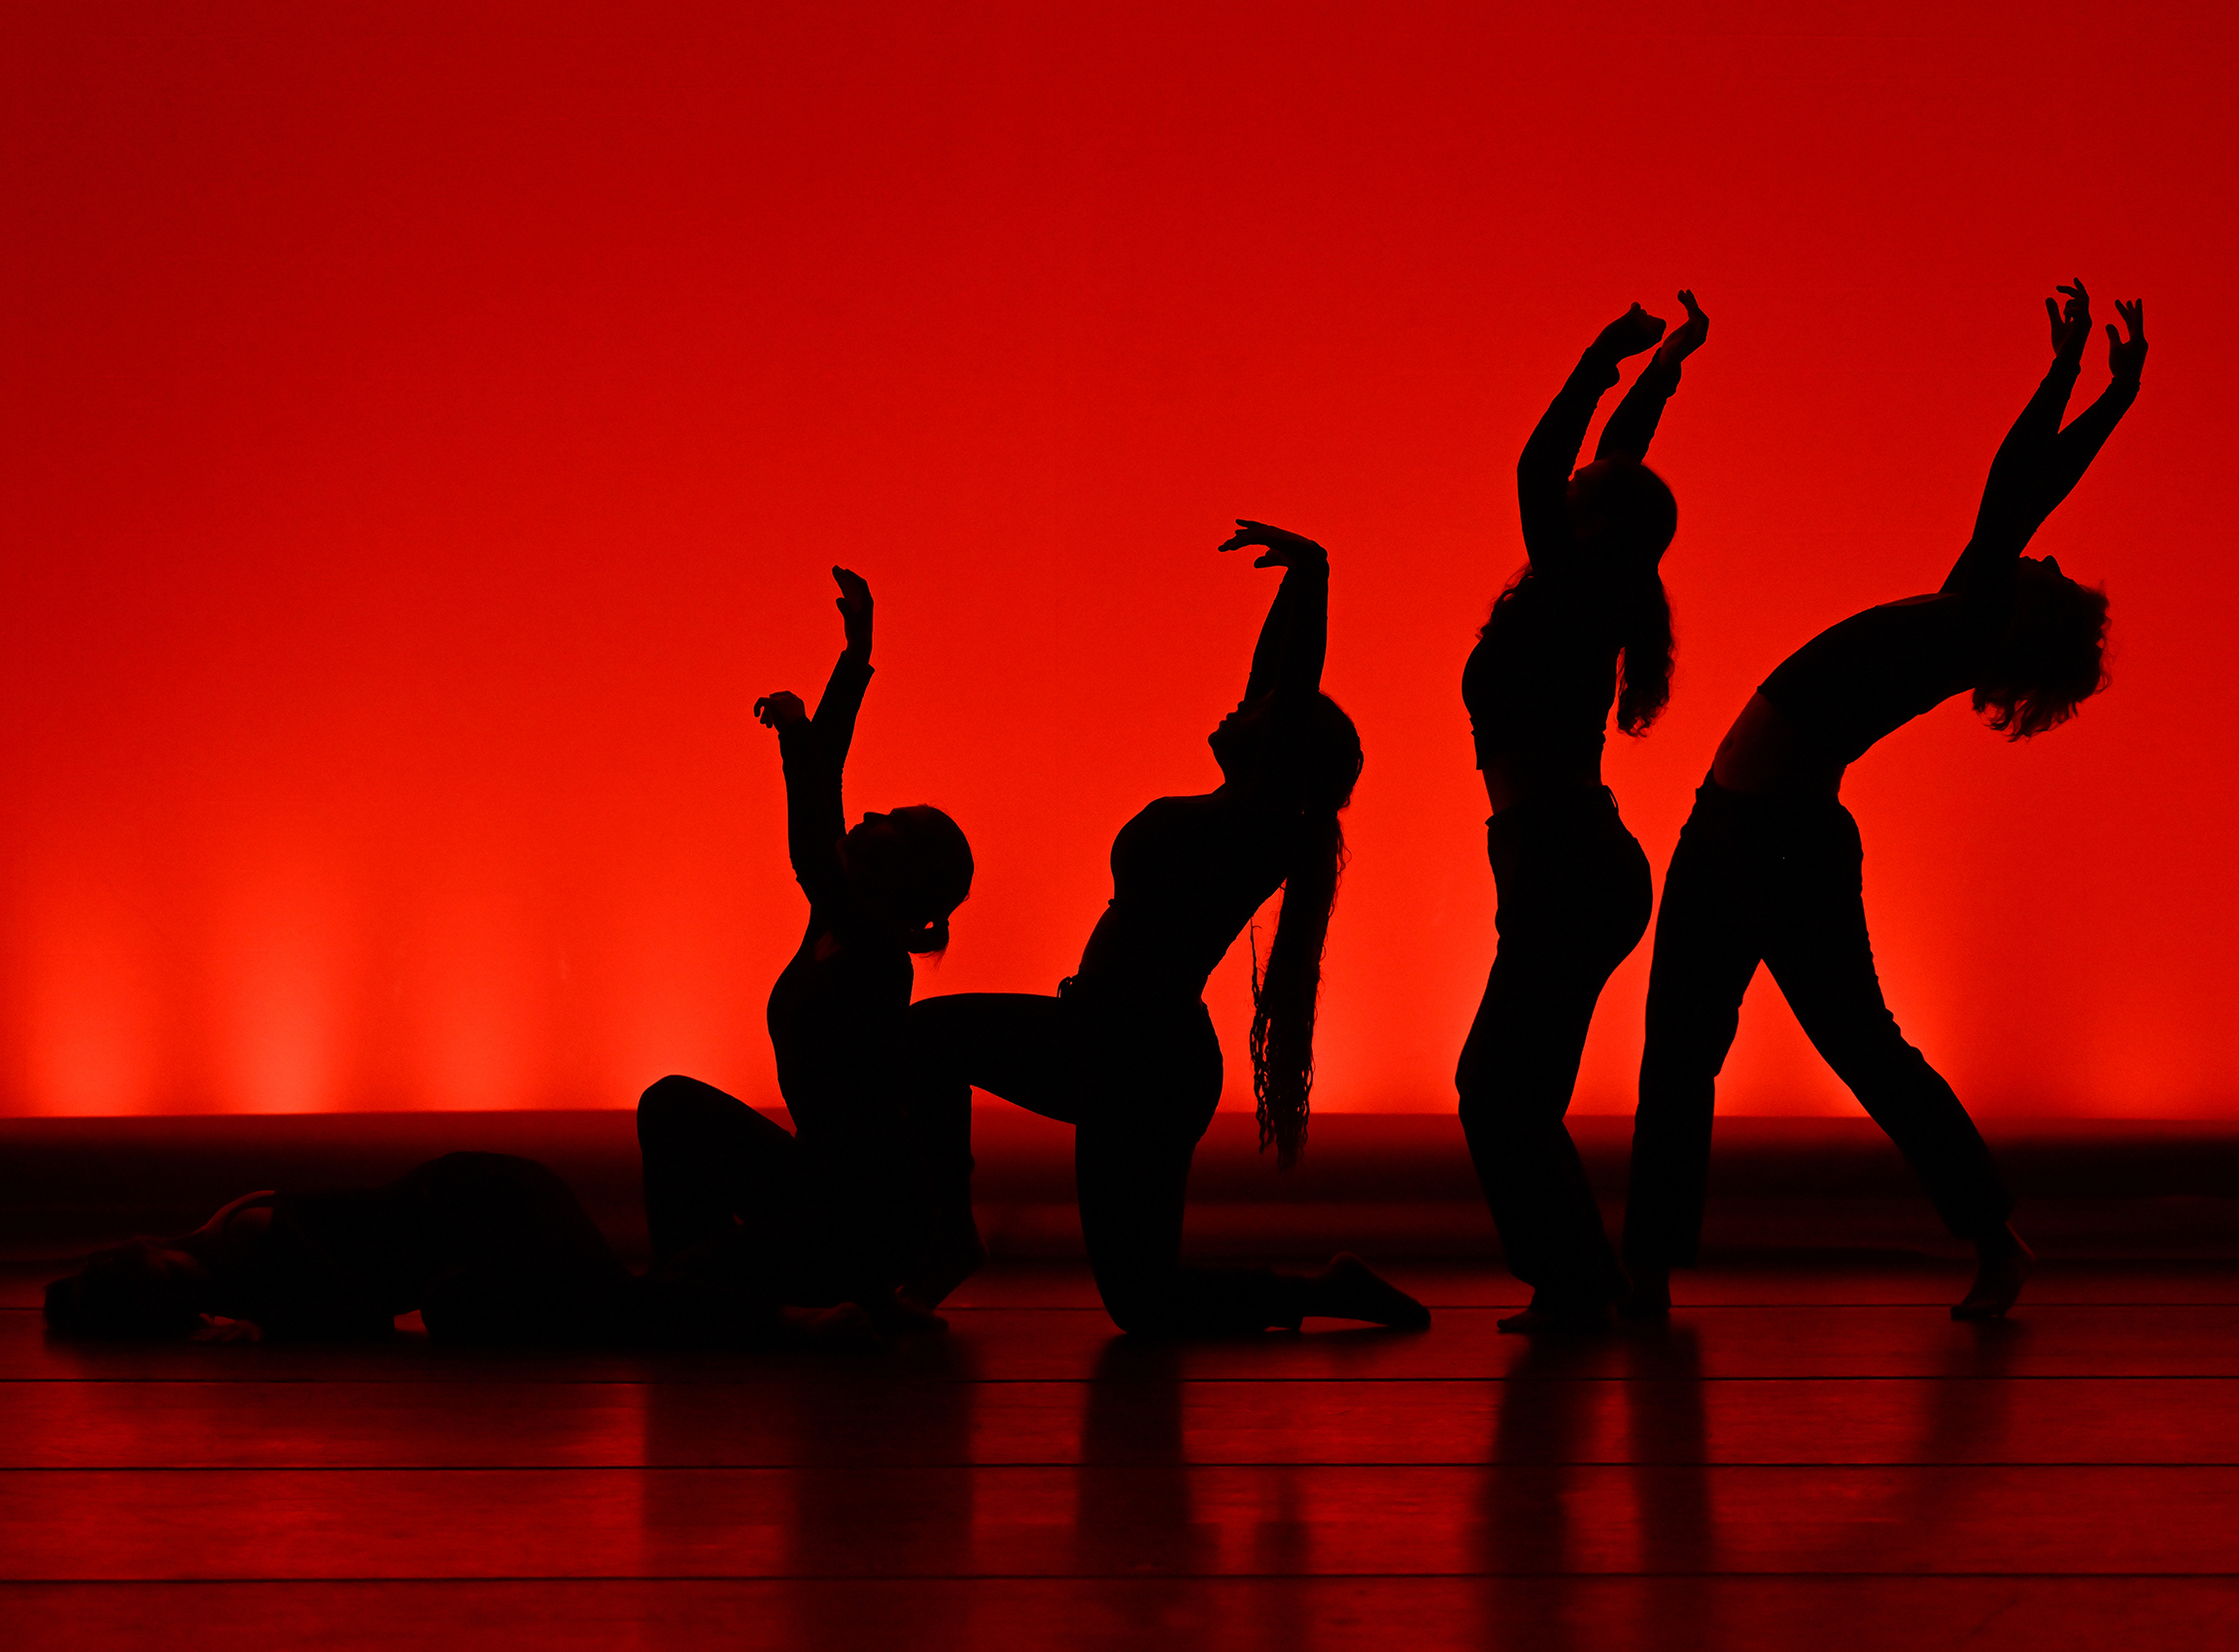 Dancers silhouetted against a rad background strike a pose on stage.